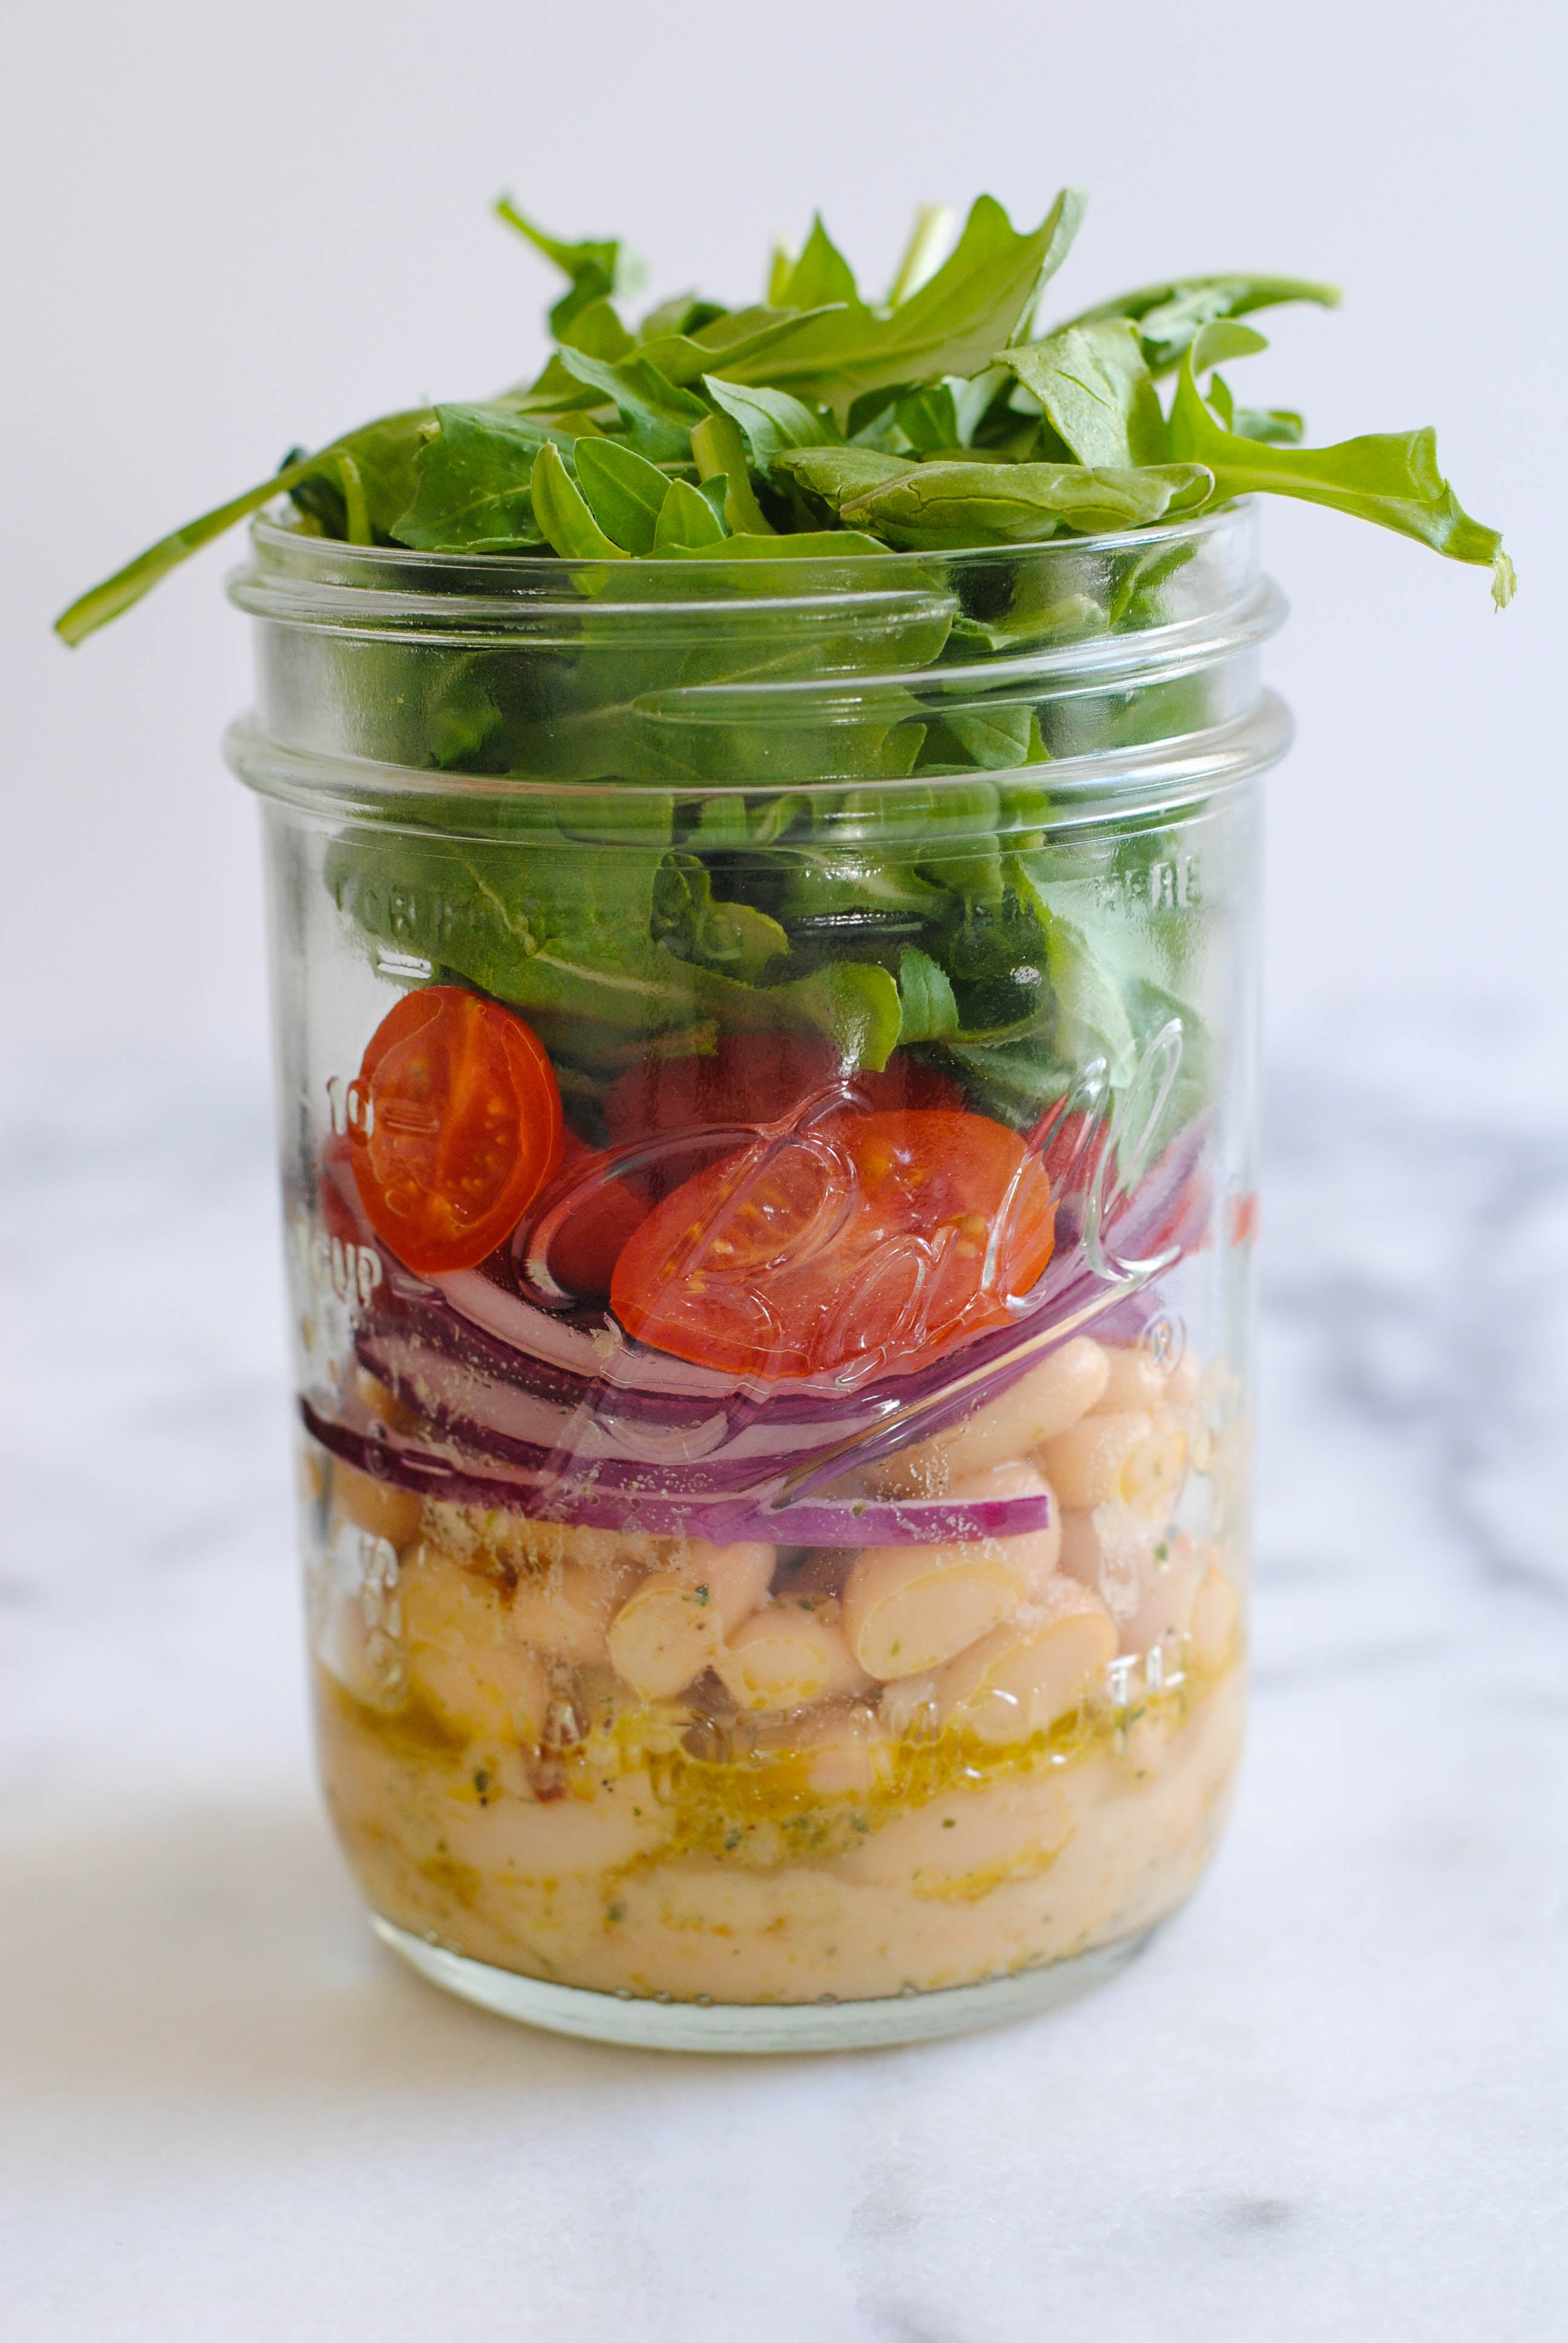 Salad in a Jar Recipes - Simple, Easy To Prepare, and Delicious